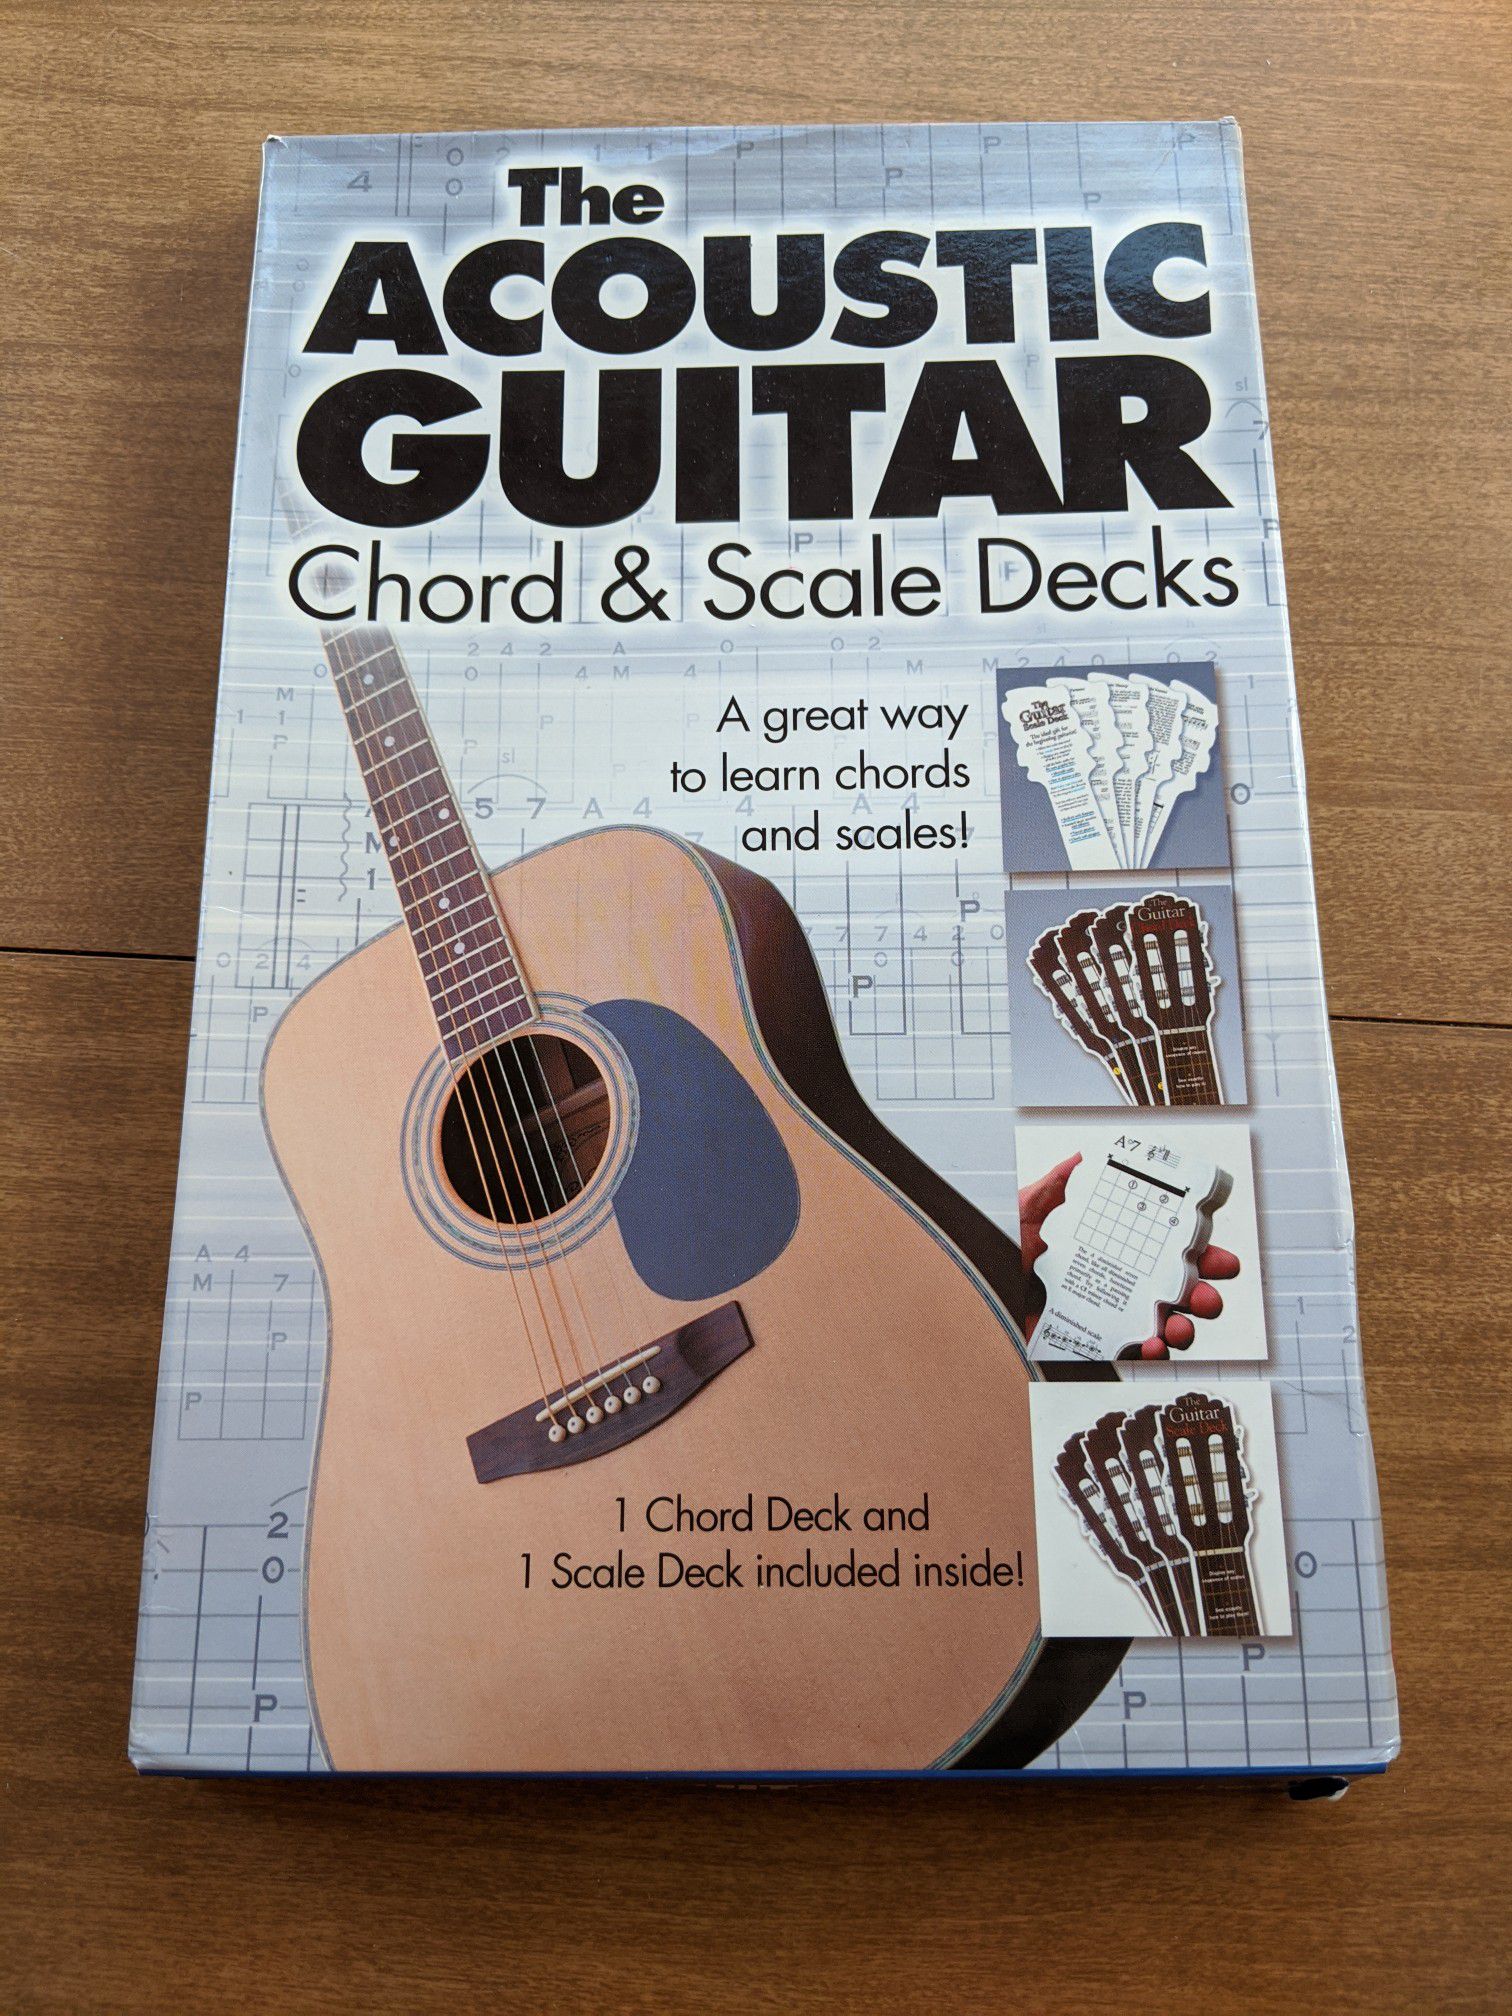 Acoustic Guitar chord and scale decks